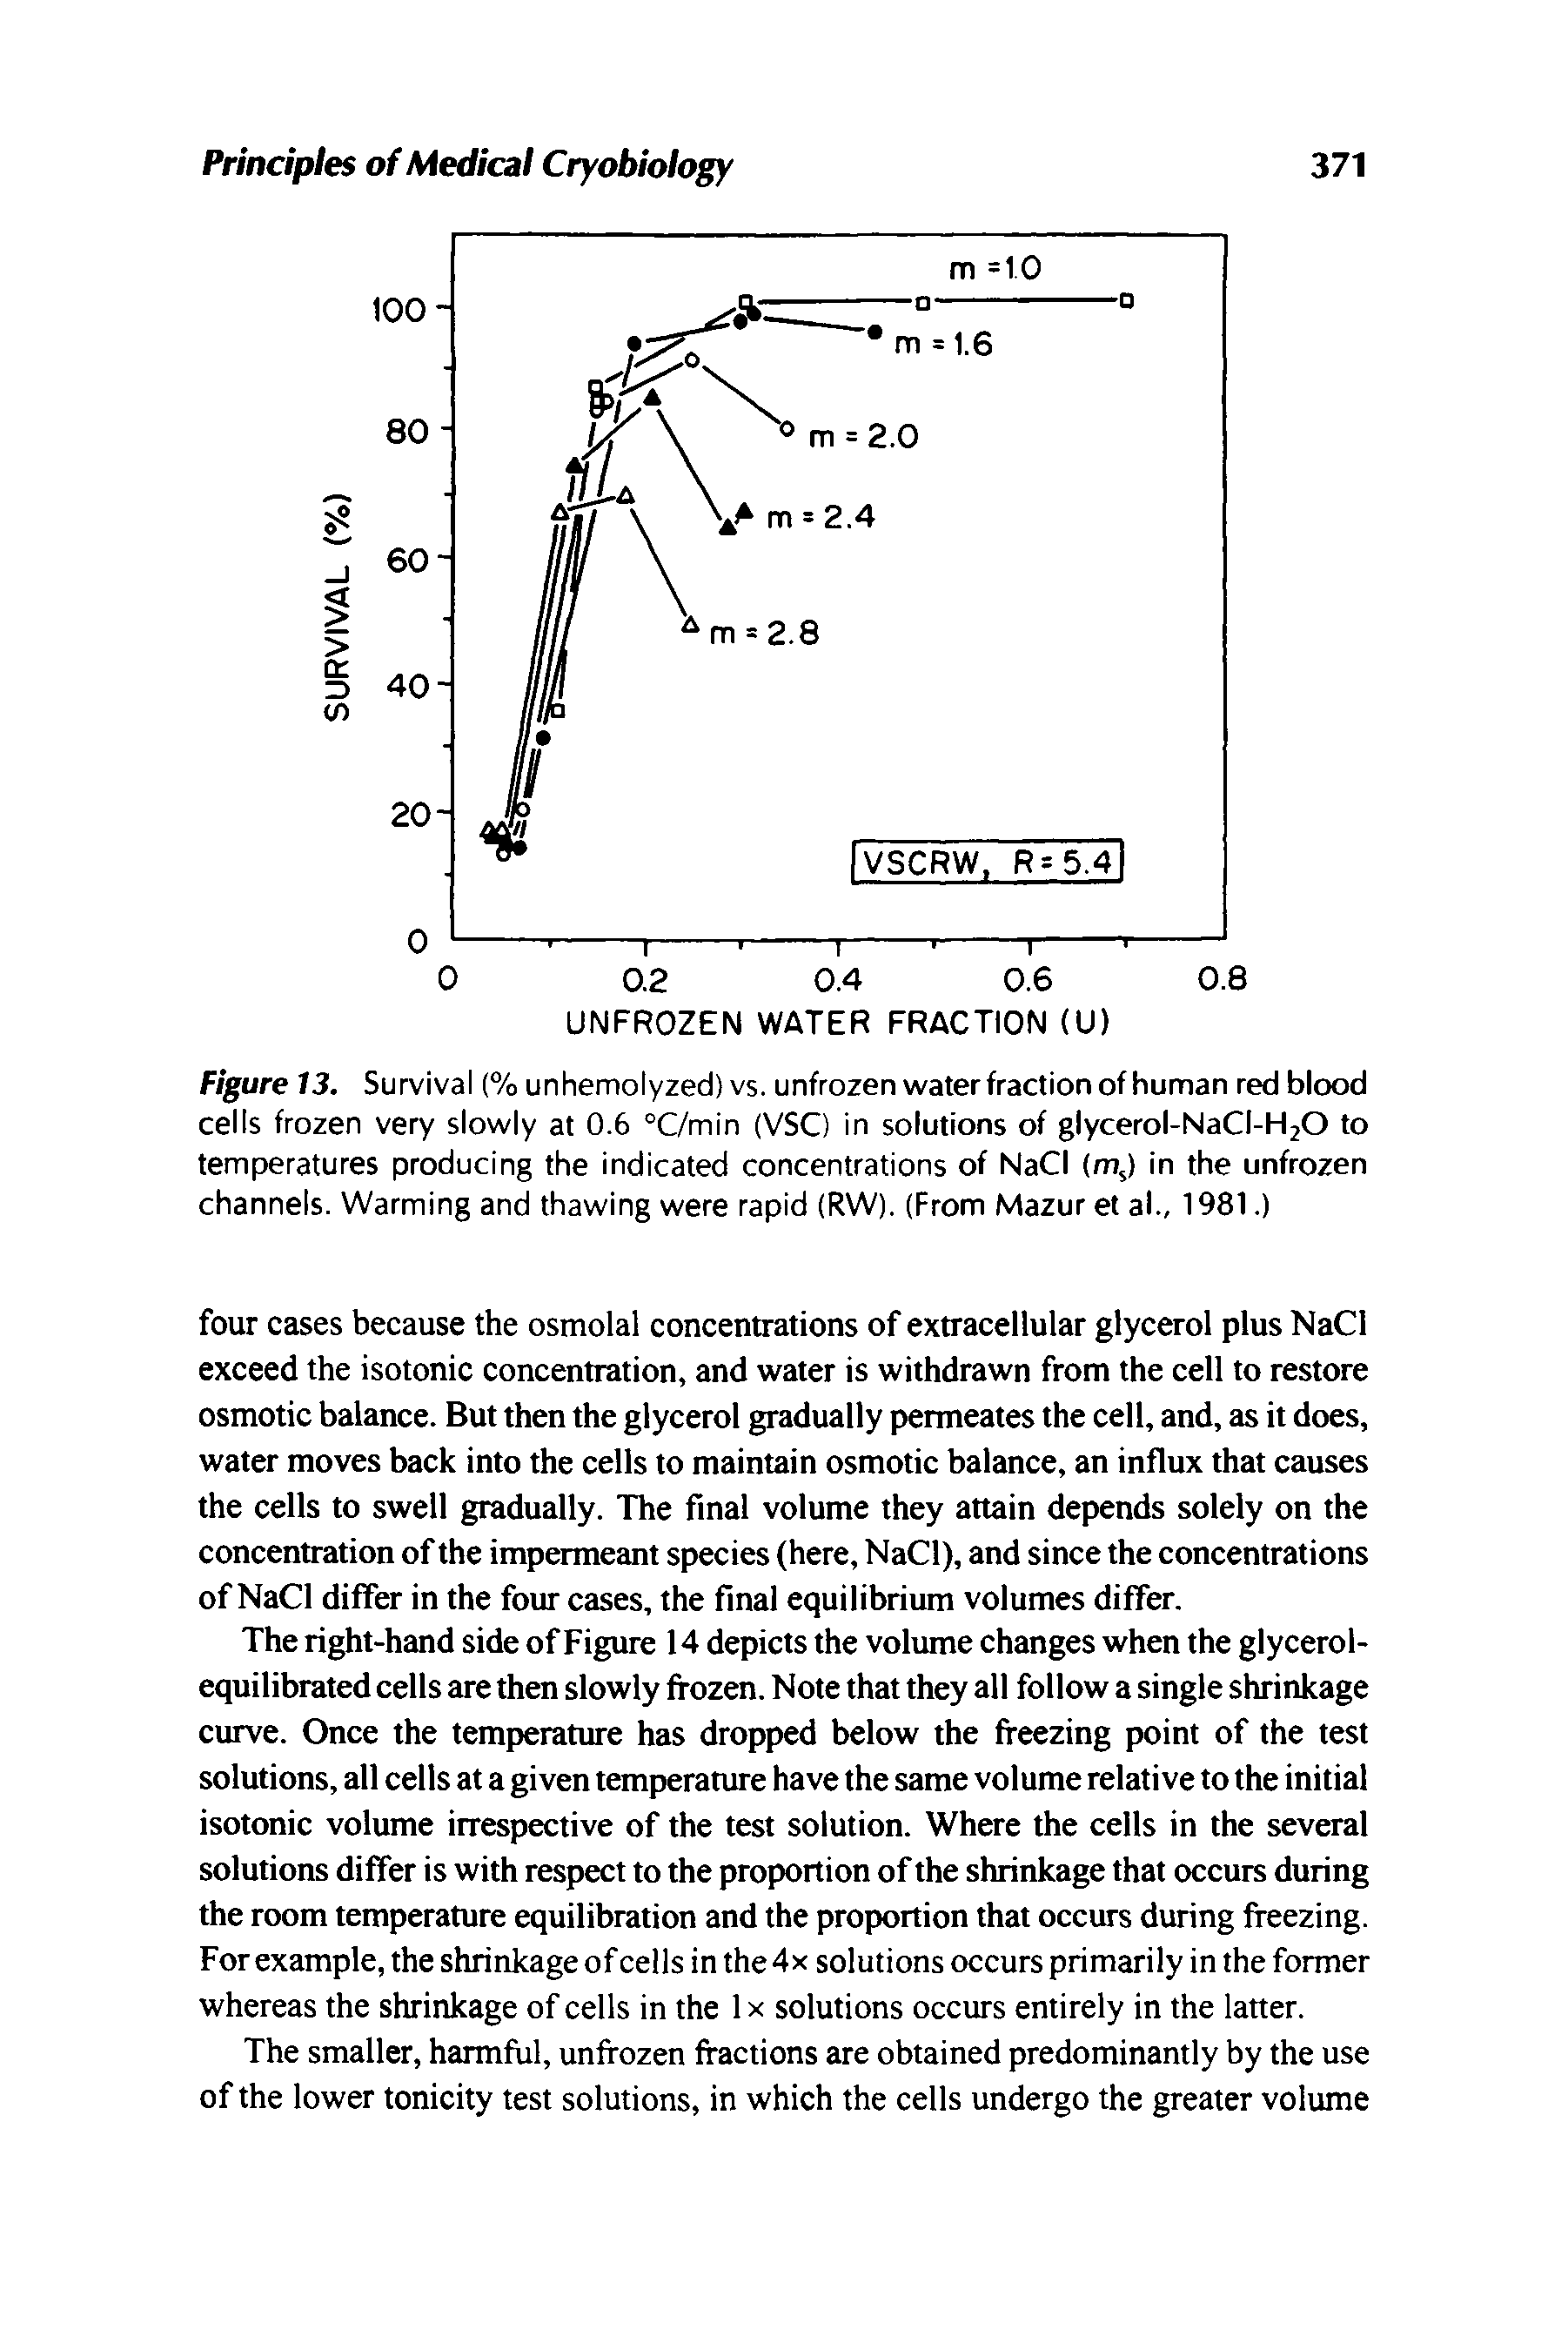 Figure 13. Survival (% unhemolyzed) vs. unfrozen water fraction of human red blood cells frozen very slowly at 0.6 °C/min (VSC) in solutions of glycerol-NaCI-H20 to temperatures producing the indicated concentrations of NaCI (m,) in the unfrozen channels. Warming and thawing were rapid (RW). (From Mazur et al., 1981.)...